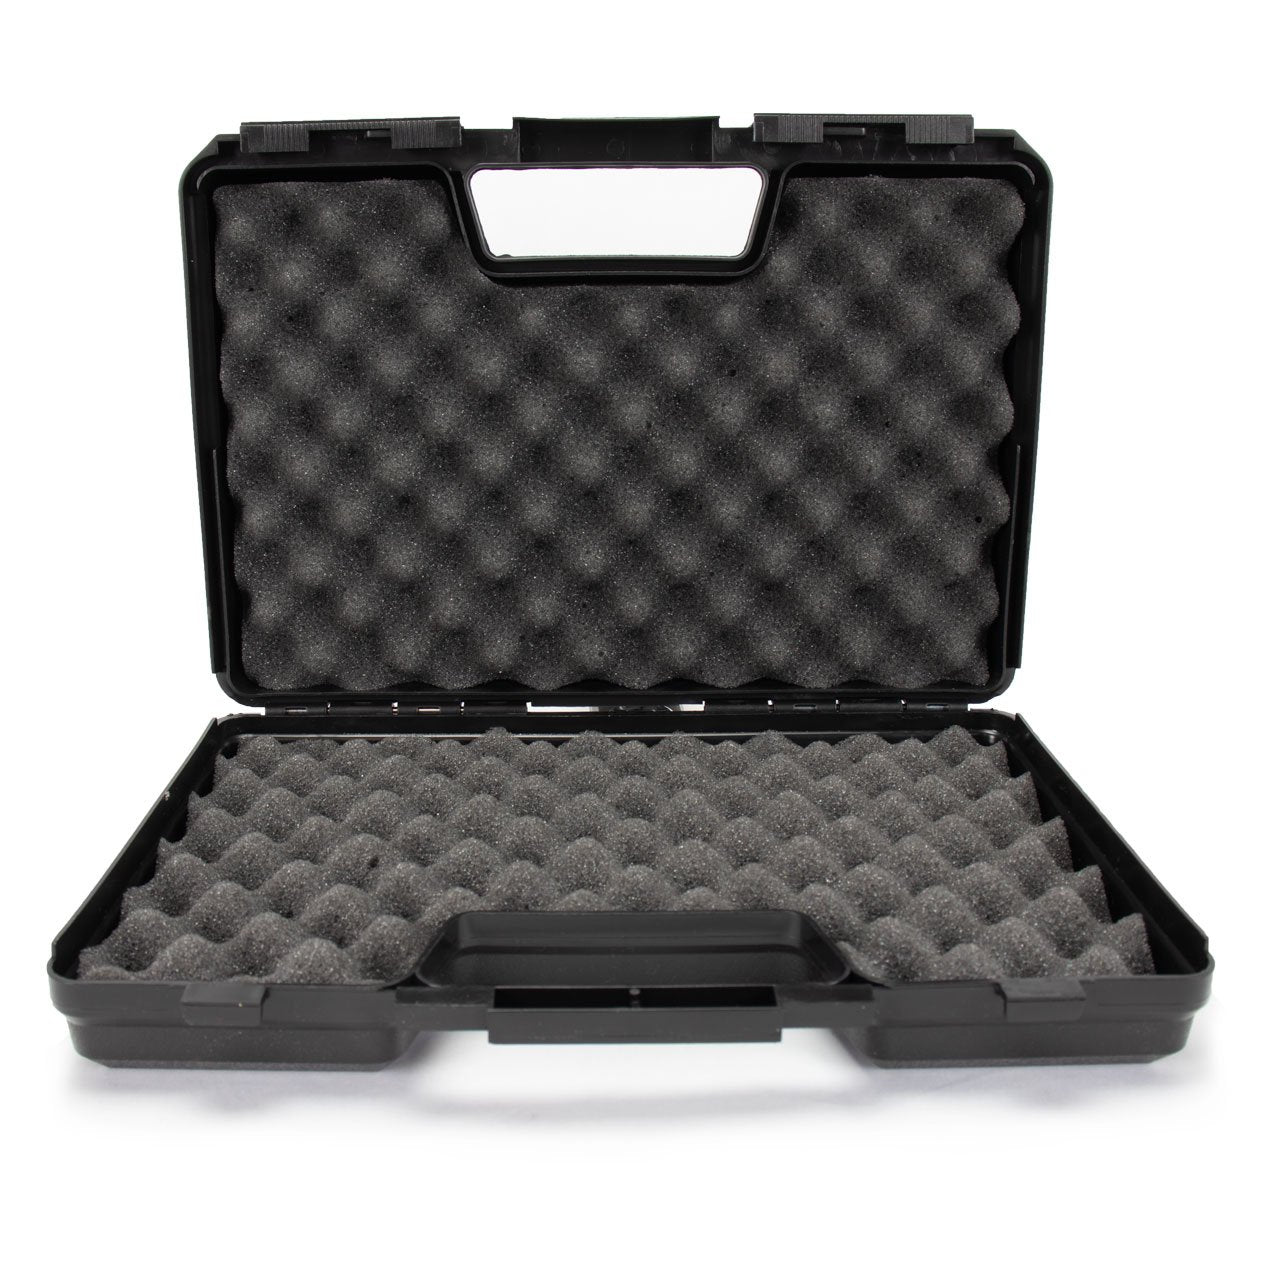 P-Force STD 12″ Pistol Case with padding - ssairsoft.com